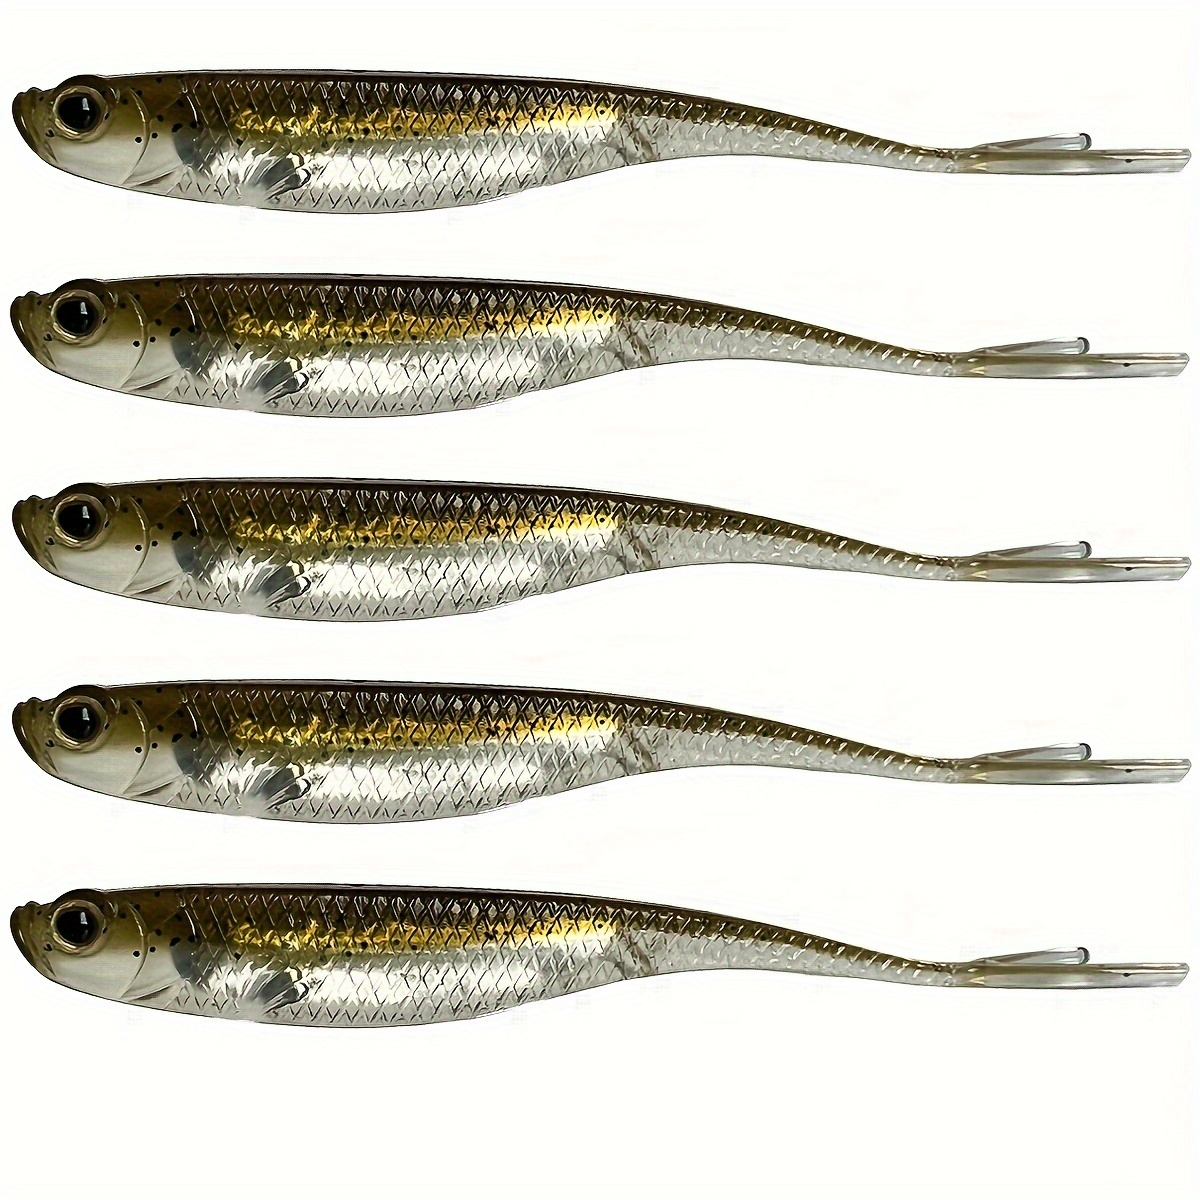 5/6pcs Soft Plastic Baits, Soft Swimbaits For Crappie Bass Fishing Lures,  Realistic Shad Bait, Outdoor Fishing Tackle